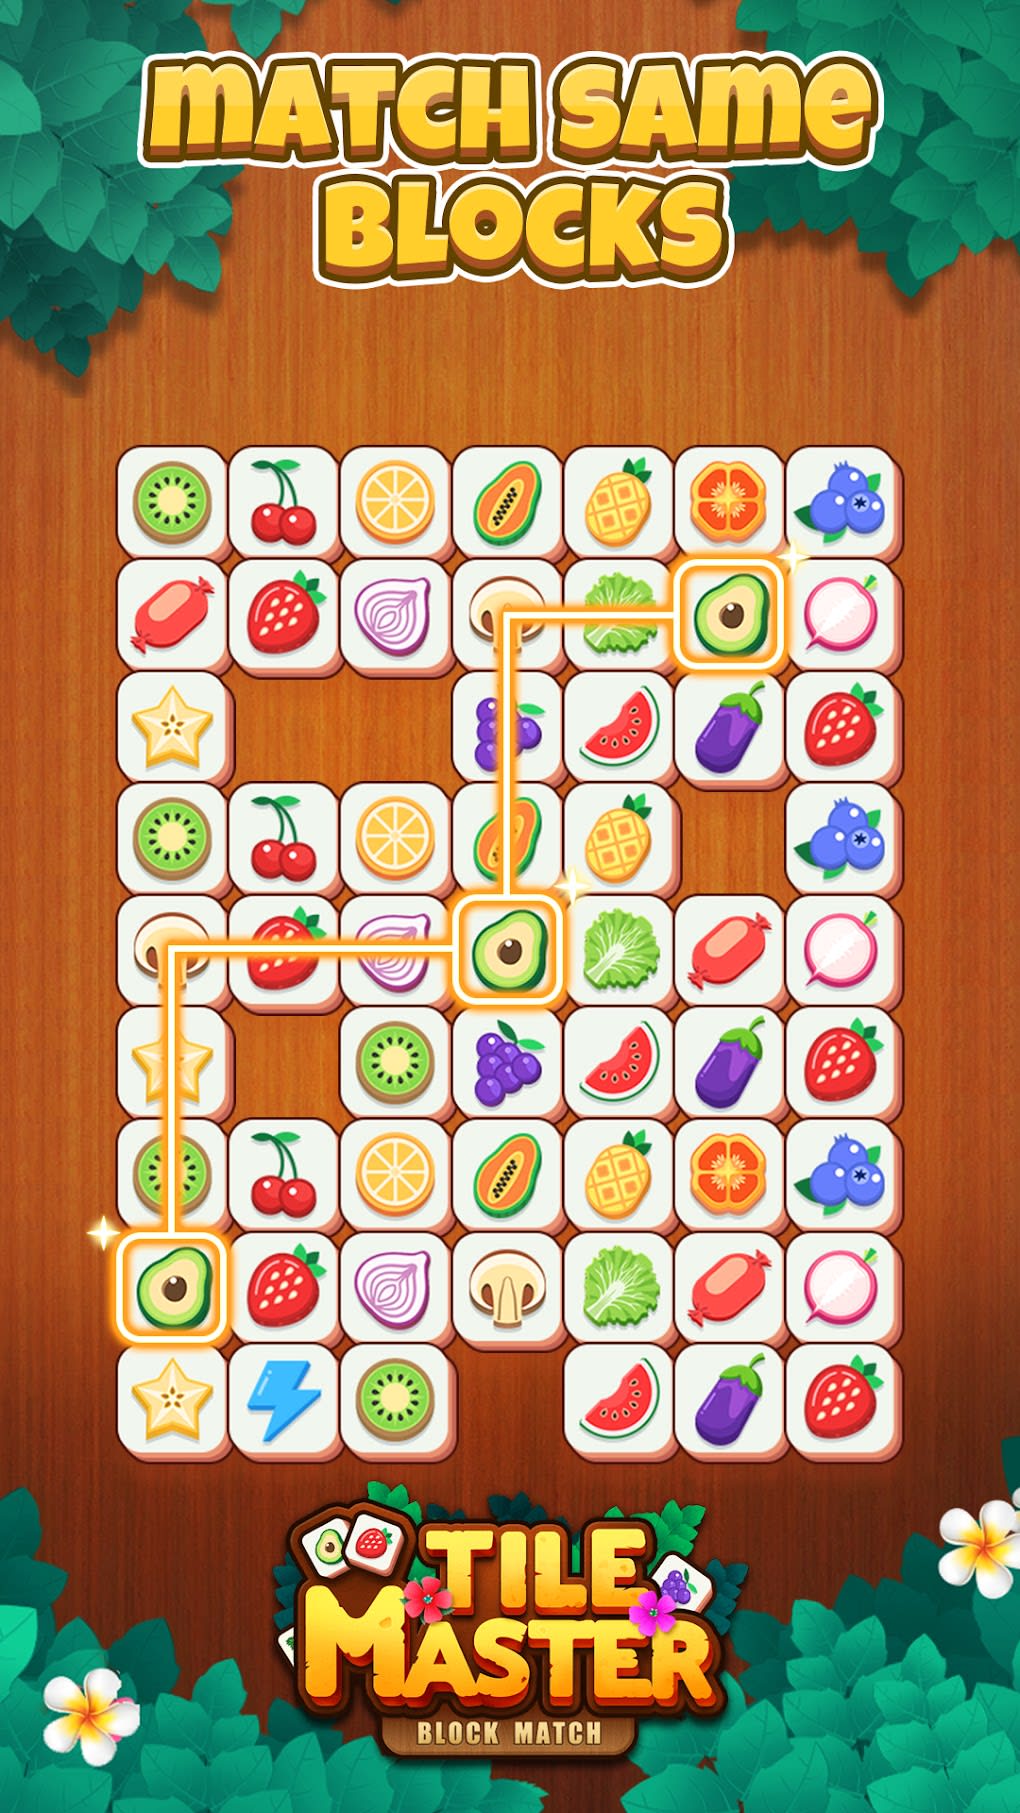 Tile connect Master. Tile connect Match кости. Match Masters.